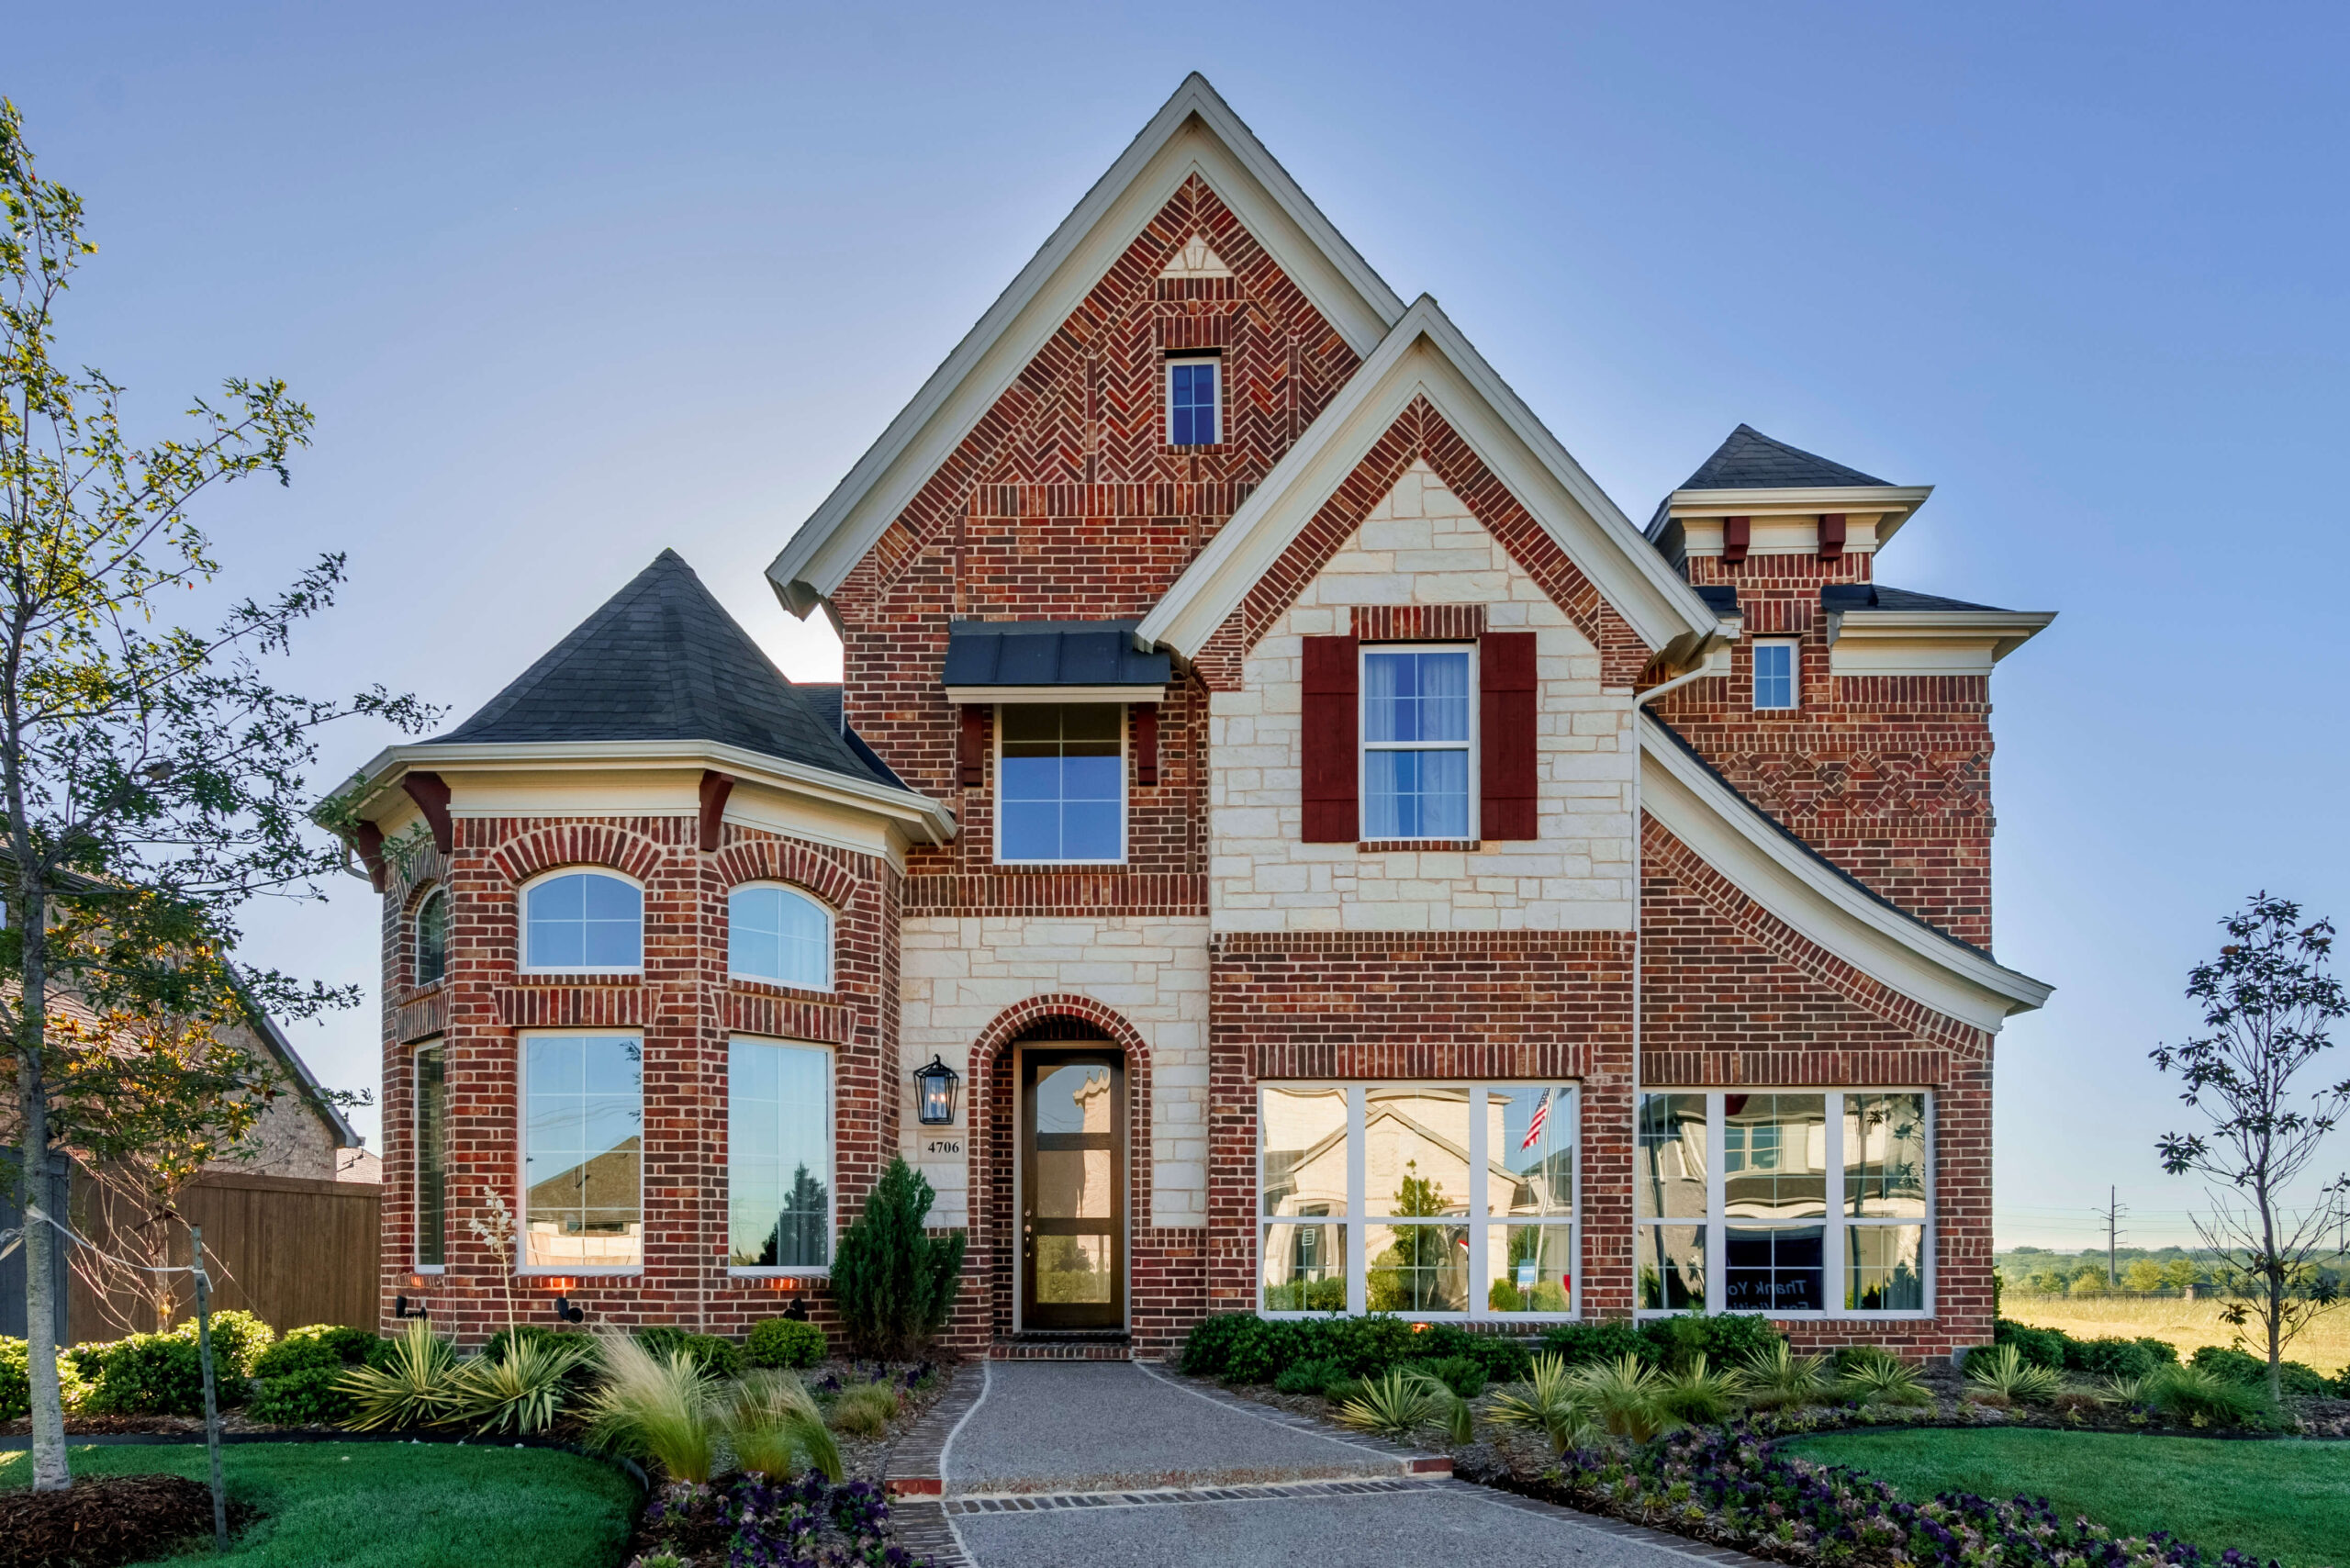 Two-story brick house with arched entryway and landscaped front yard in new home communities in Mansfield, TX.